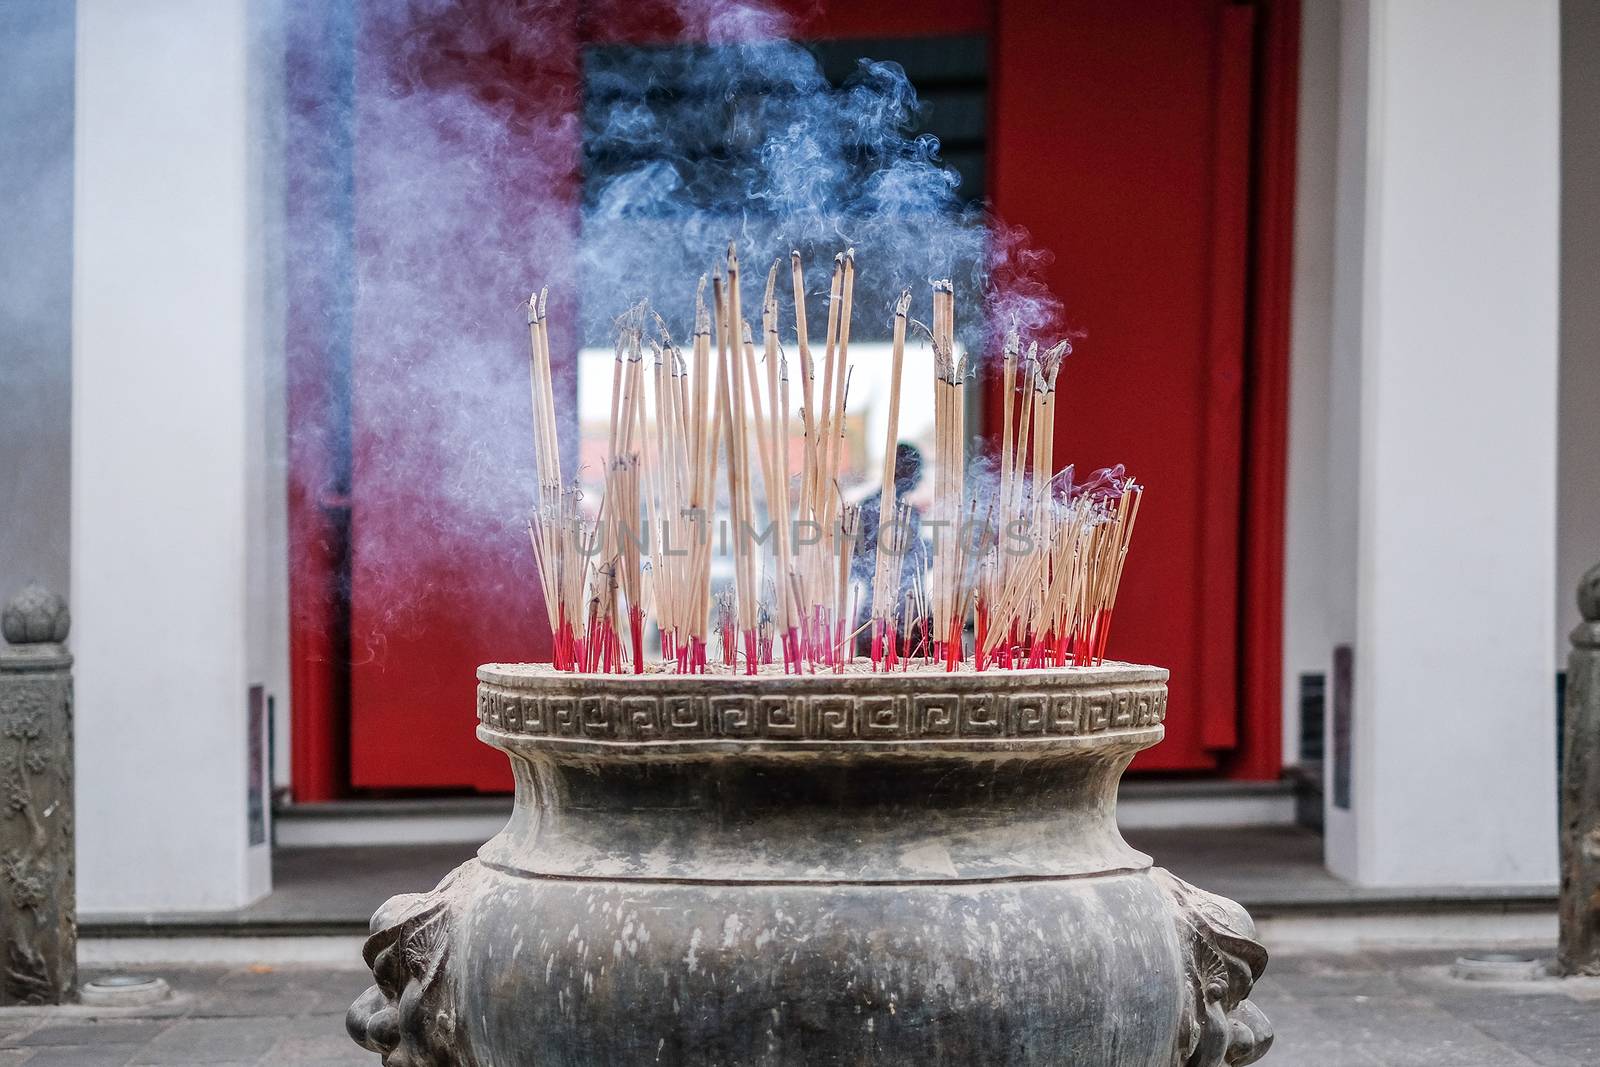 Incense sticks in ashes bucket in Temple Thialand